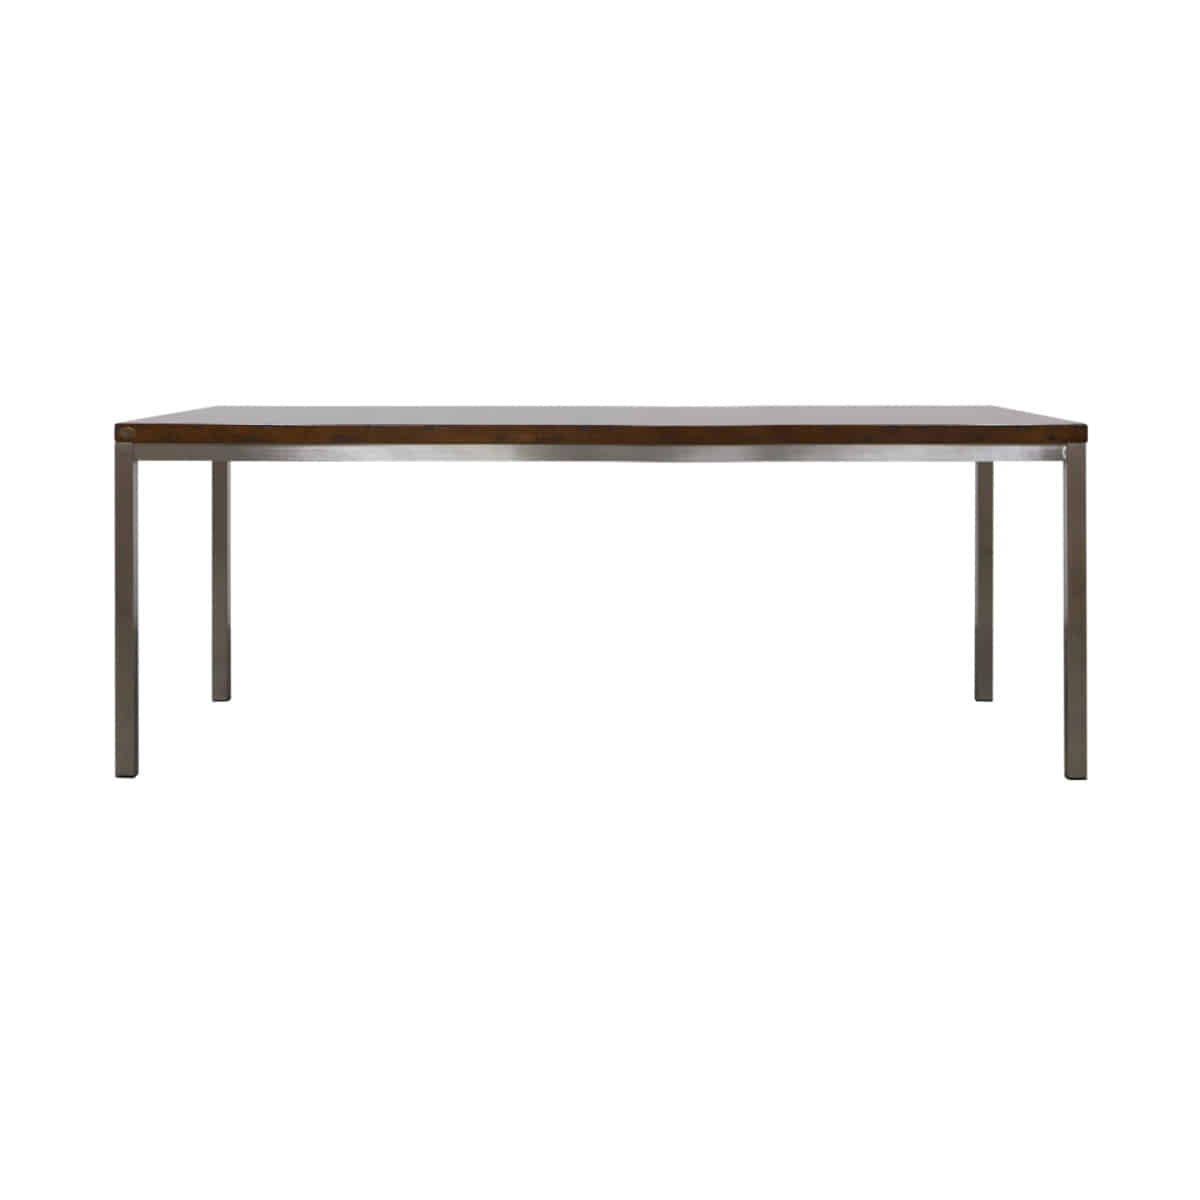 BUSATTO Steel Dining Table 부사토 식탁 - 220MADE IN ITALY